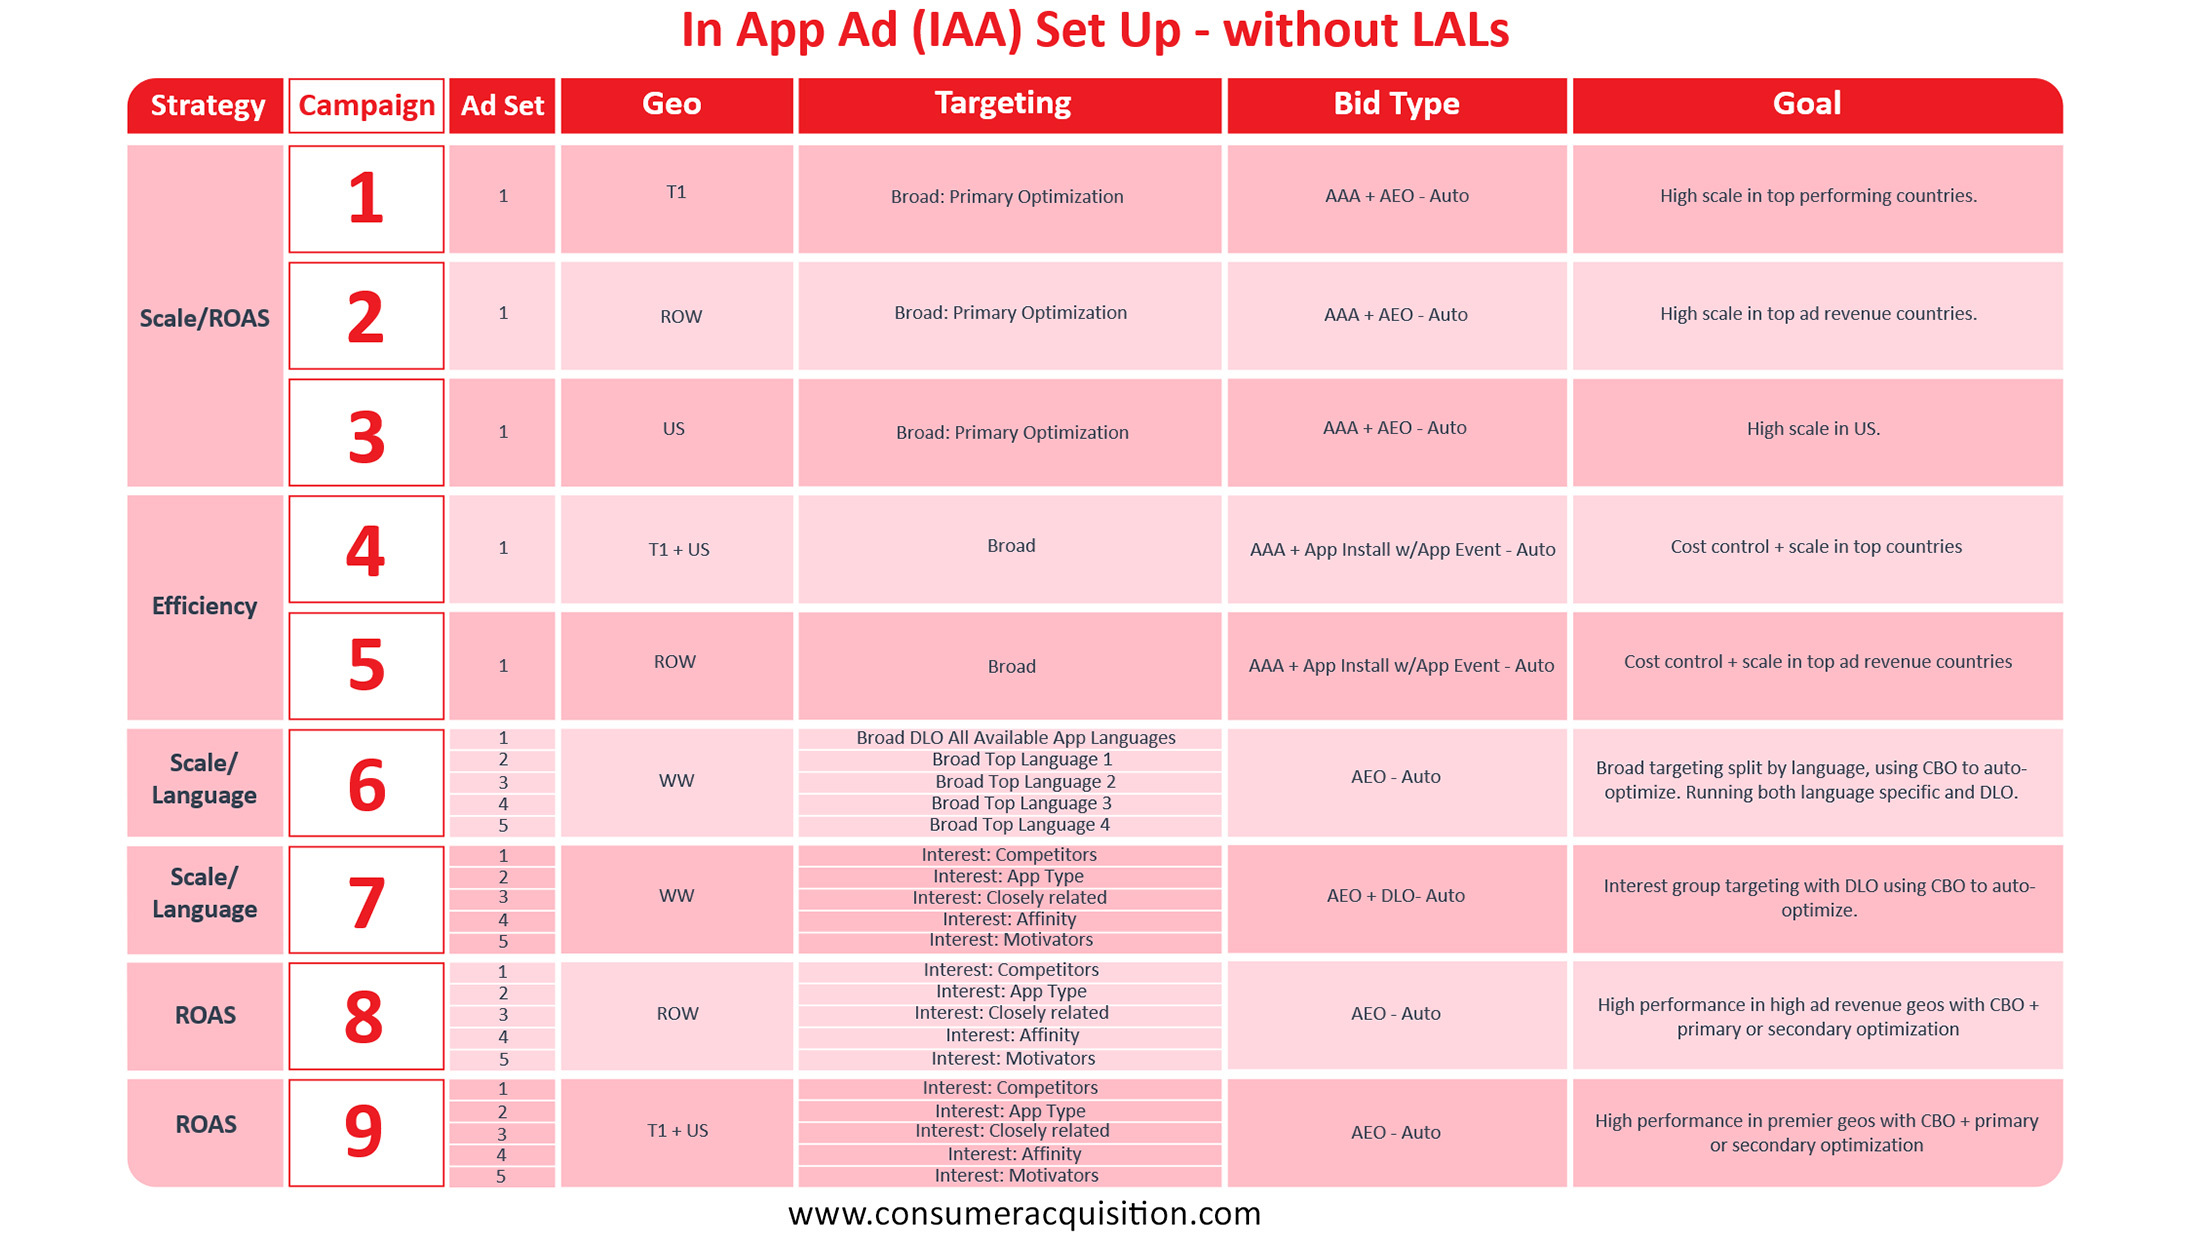 In App Ad (IAA) Set Up - Without any LALs